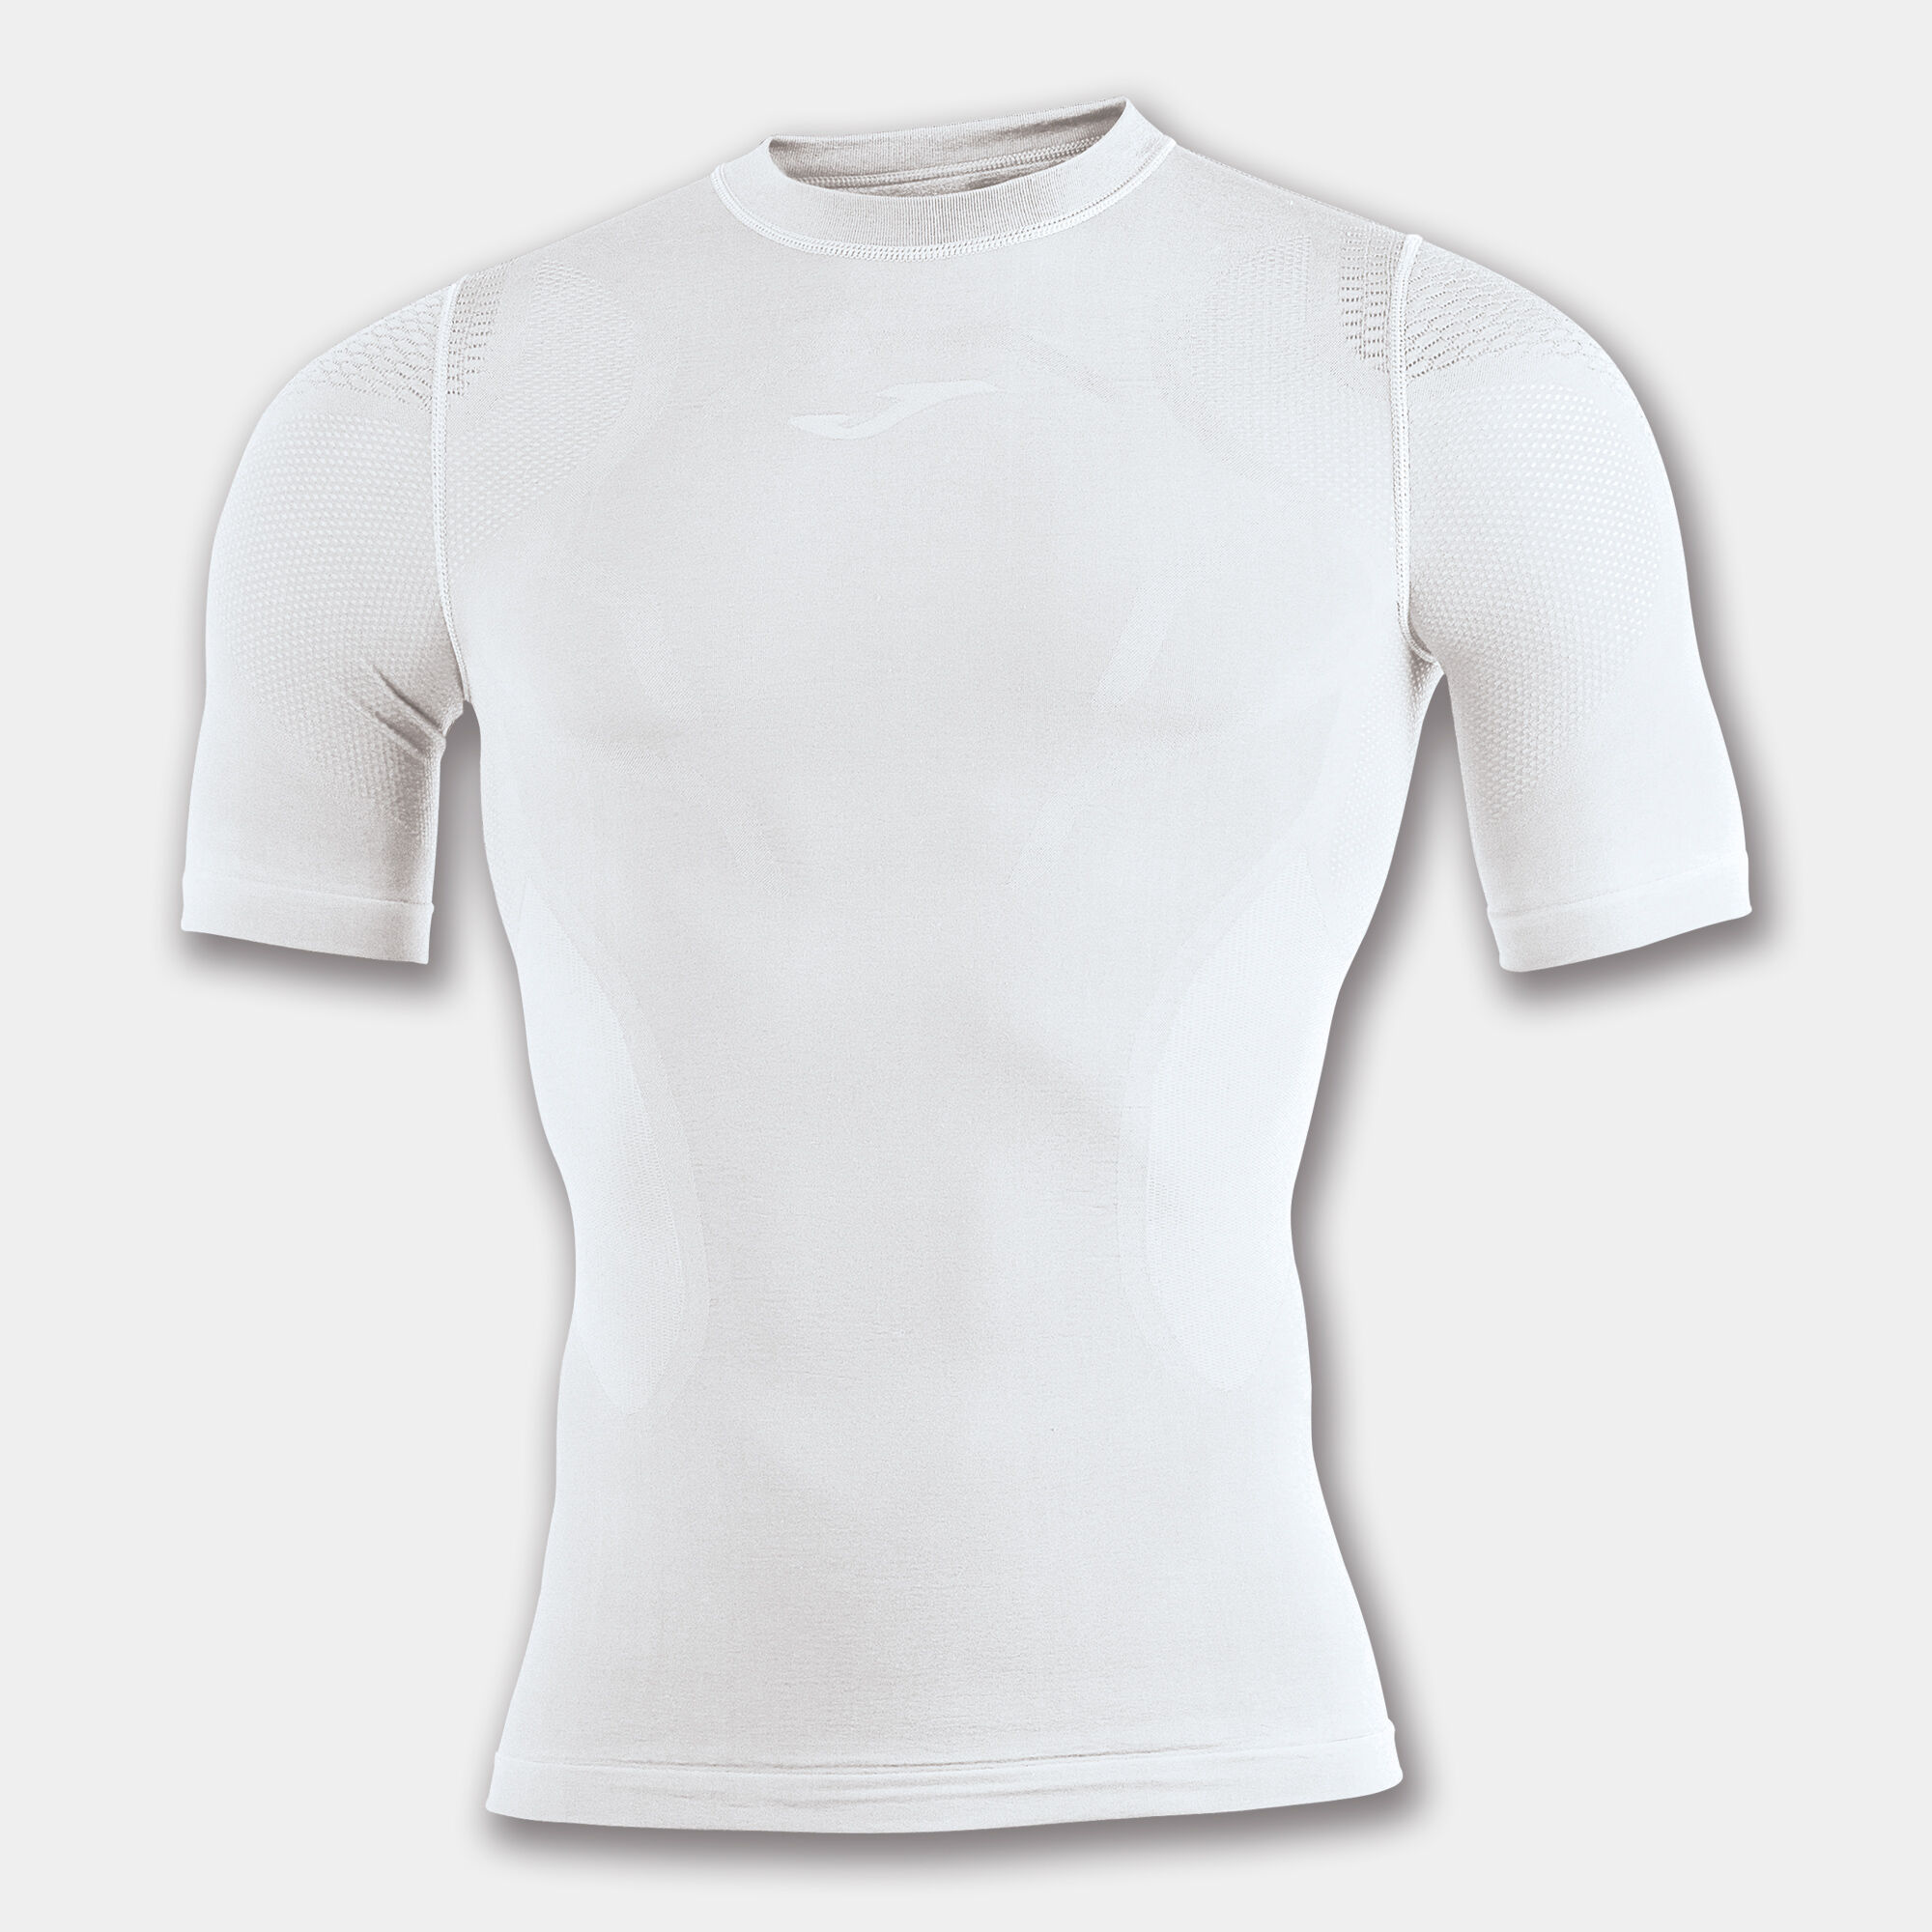 Maillot manches courtes homme Brama Emotion II blanc